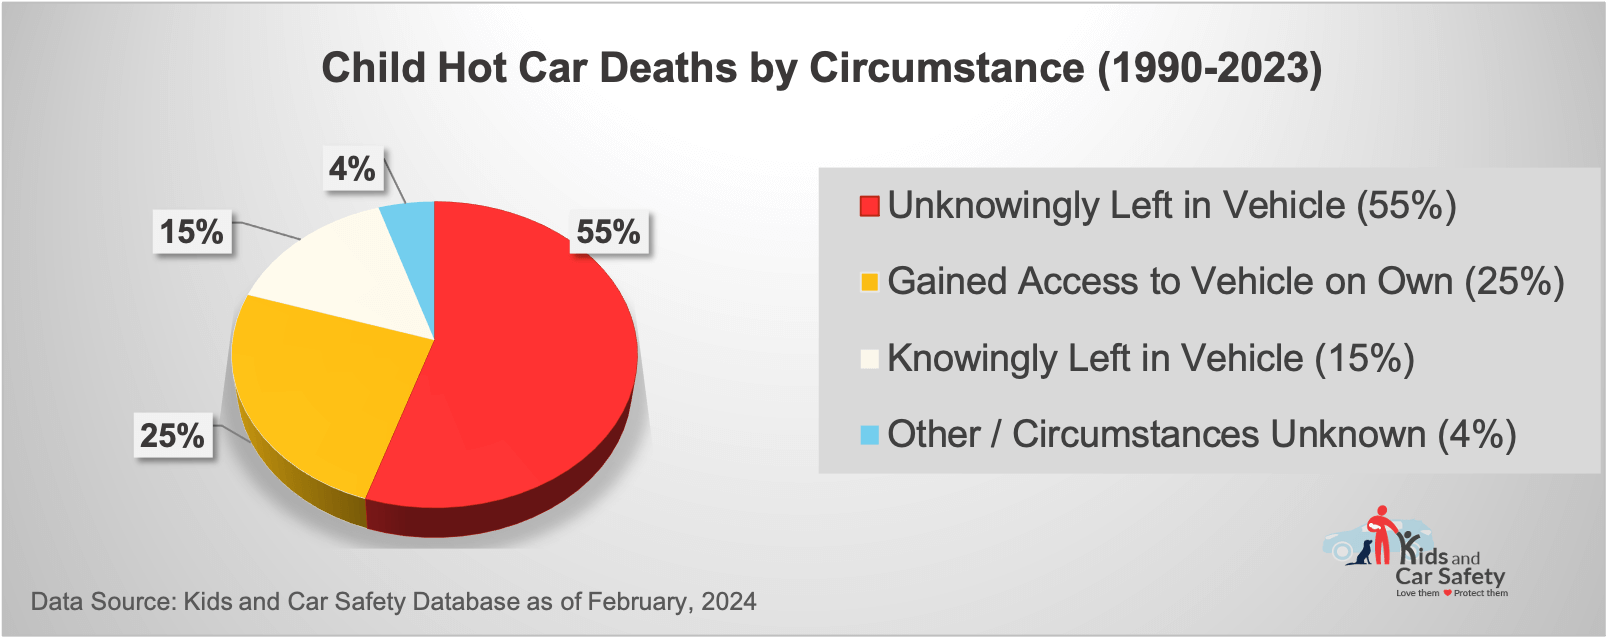 Circumstances by type